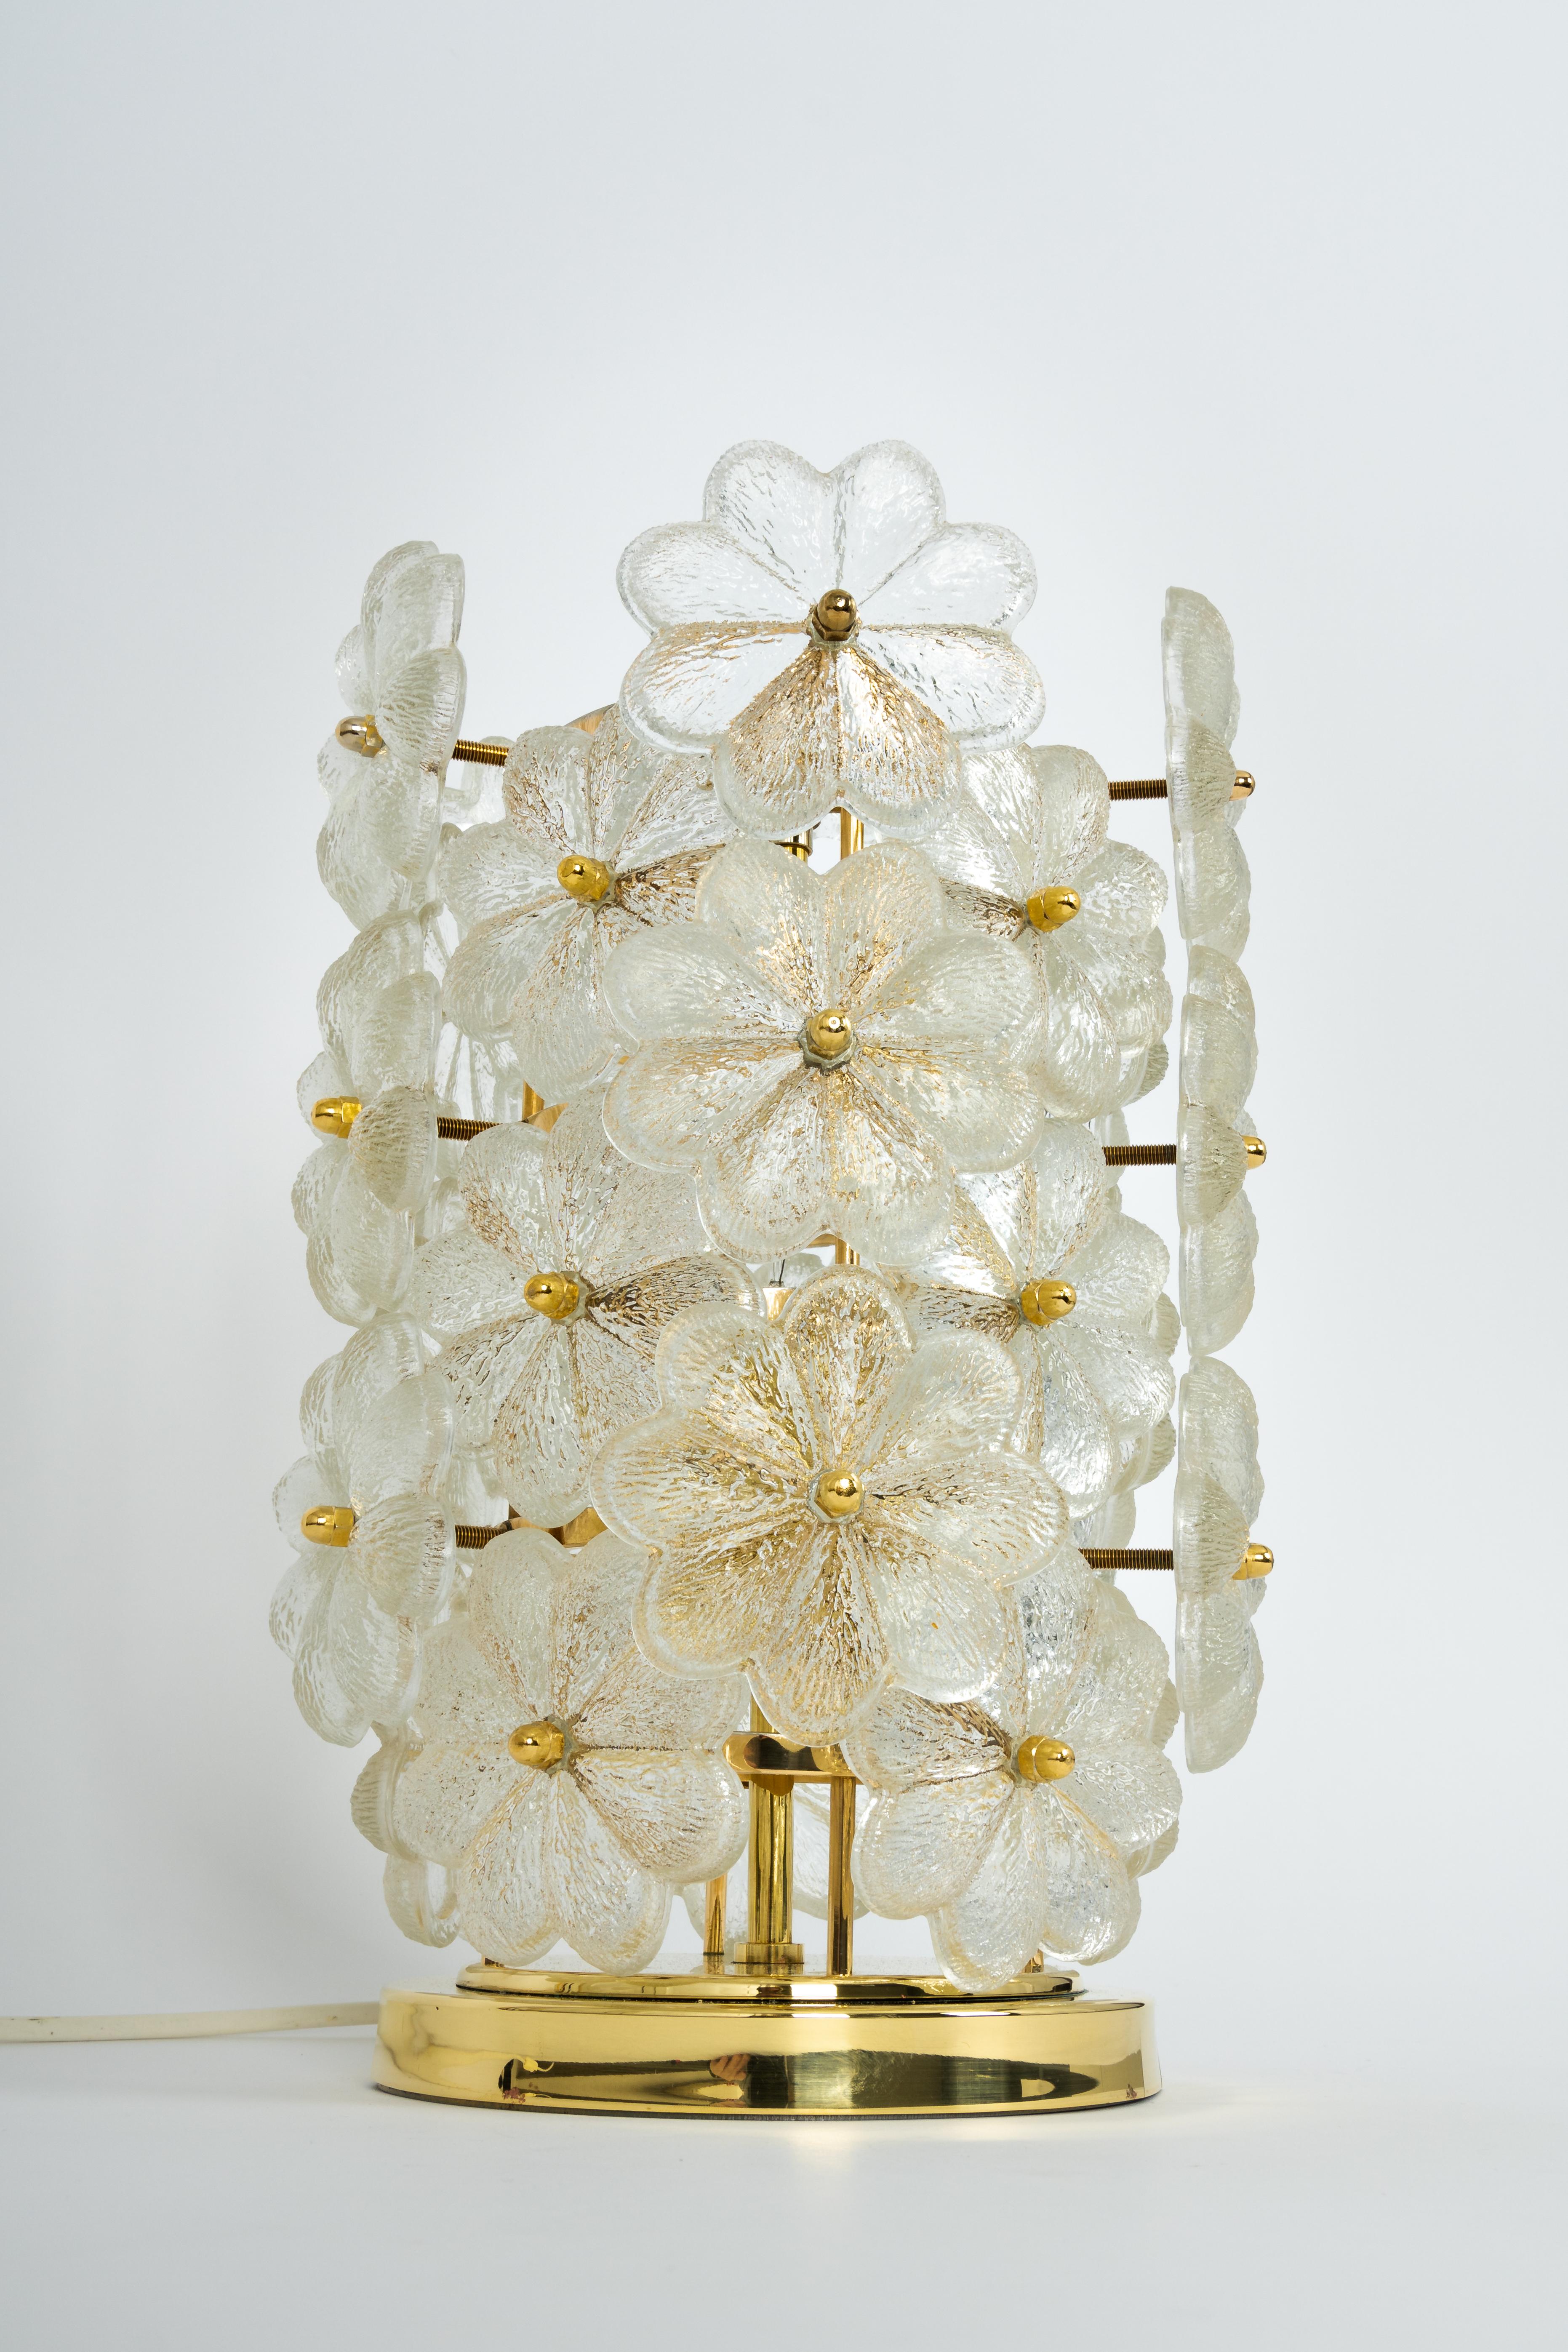 Petite stunning Murano glass flower table light. The light is composed of many glass flowers over a polished brass base, made by Ernst Palme in Germany, 1970s.

It needs 1 x E27 standard bulb.
Light bulbs are not included. It is possible to